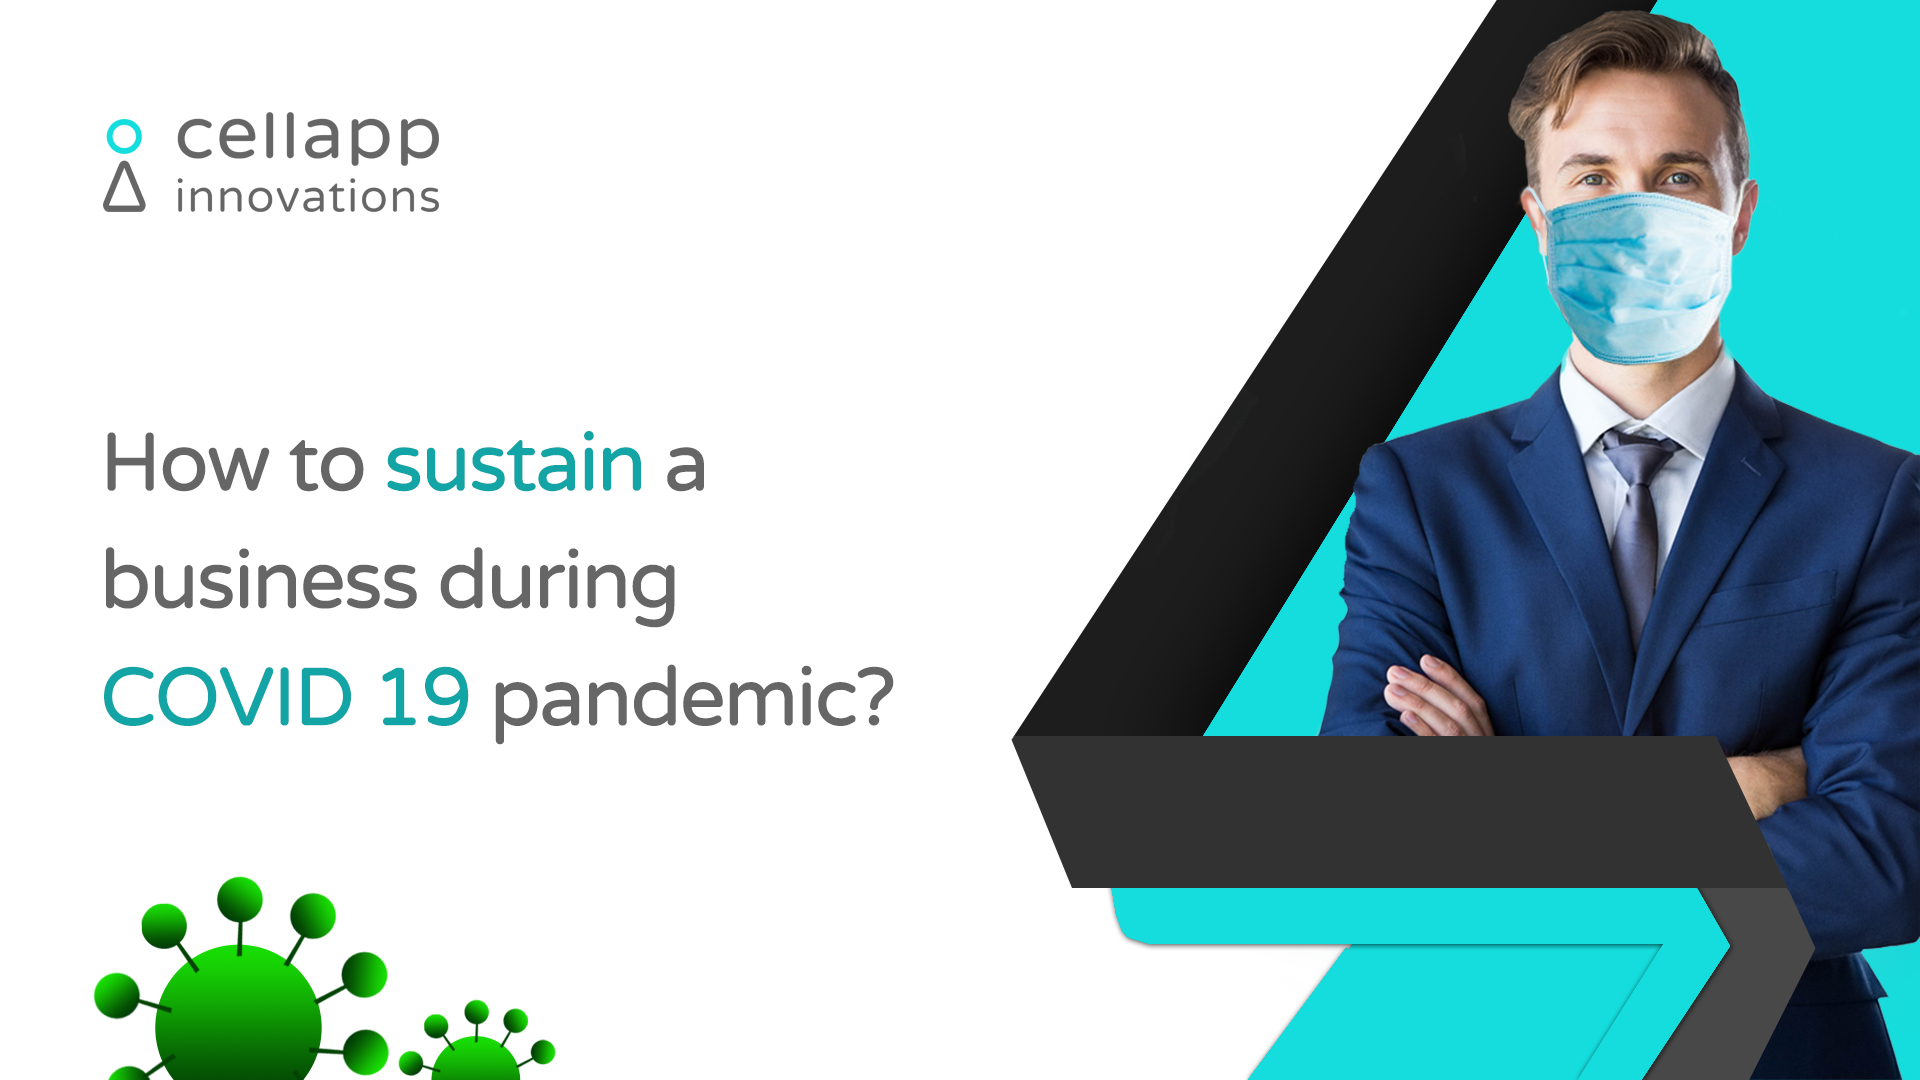 How to sustain a business during the Covid-19 pandemic?